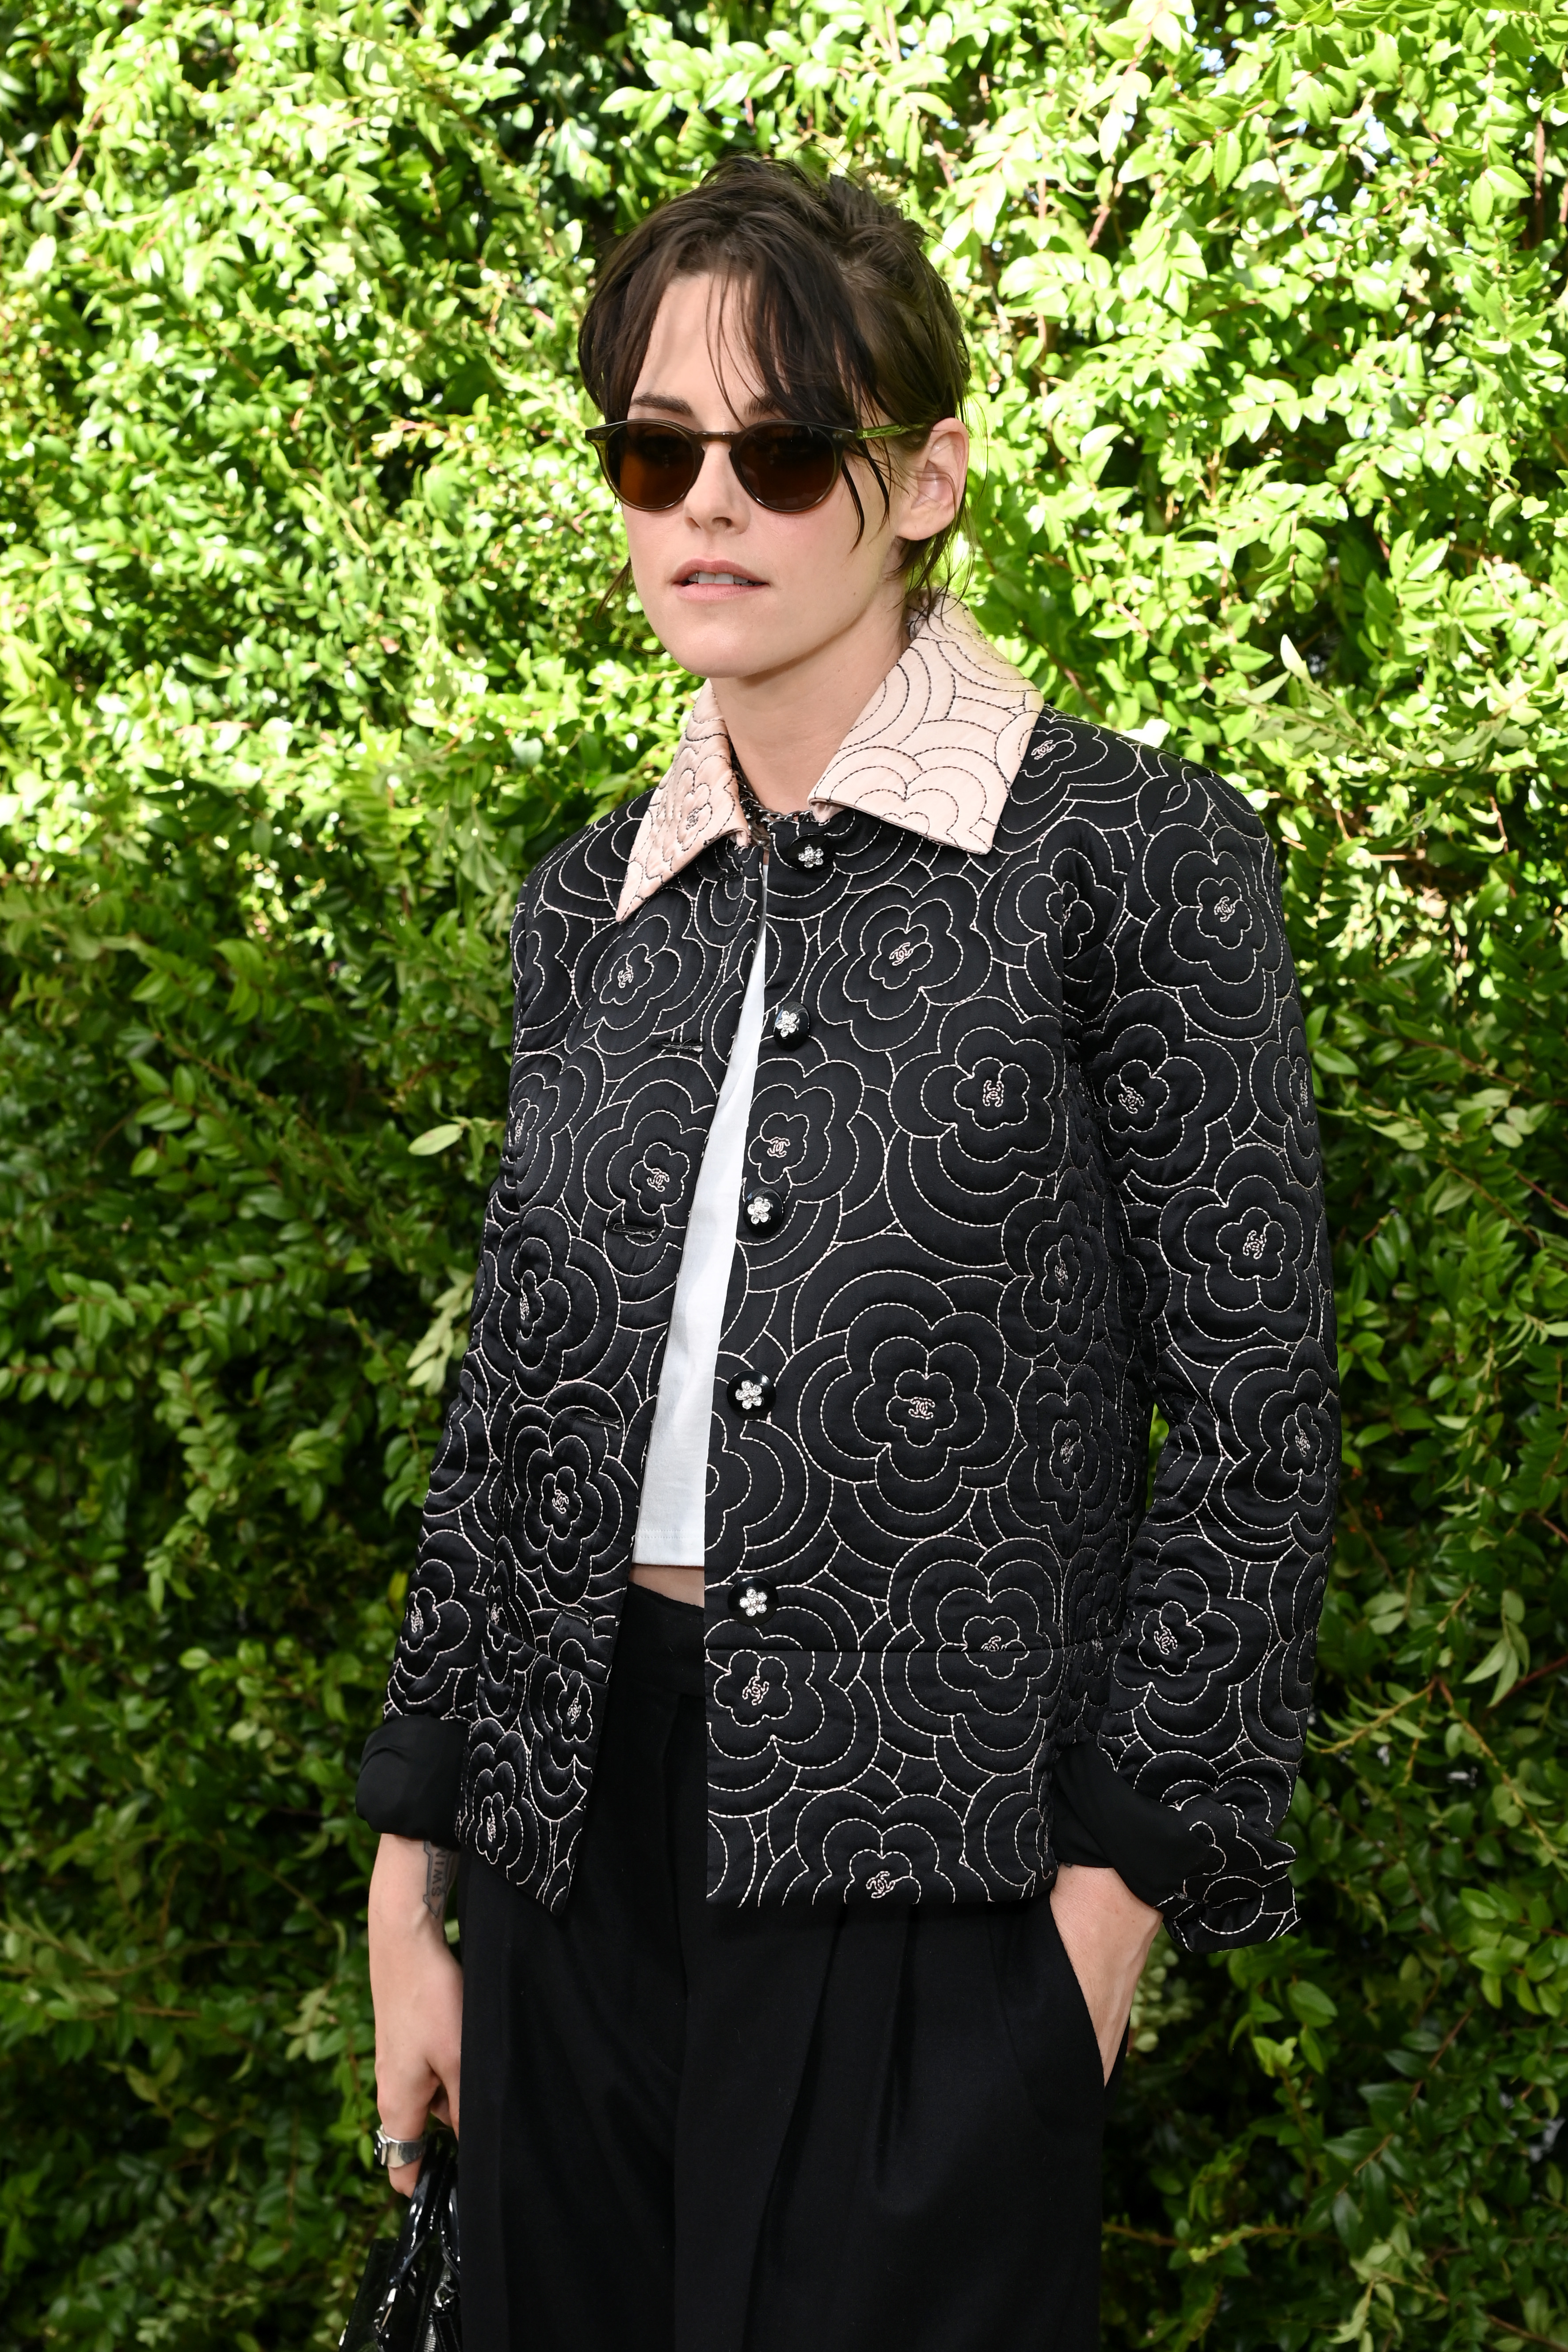 closeup of her wearing an embroidered jacket with short hair and sunglasses